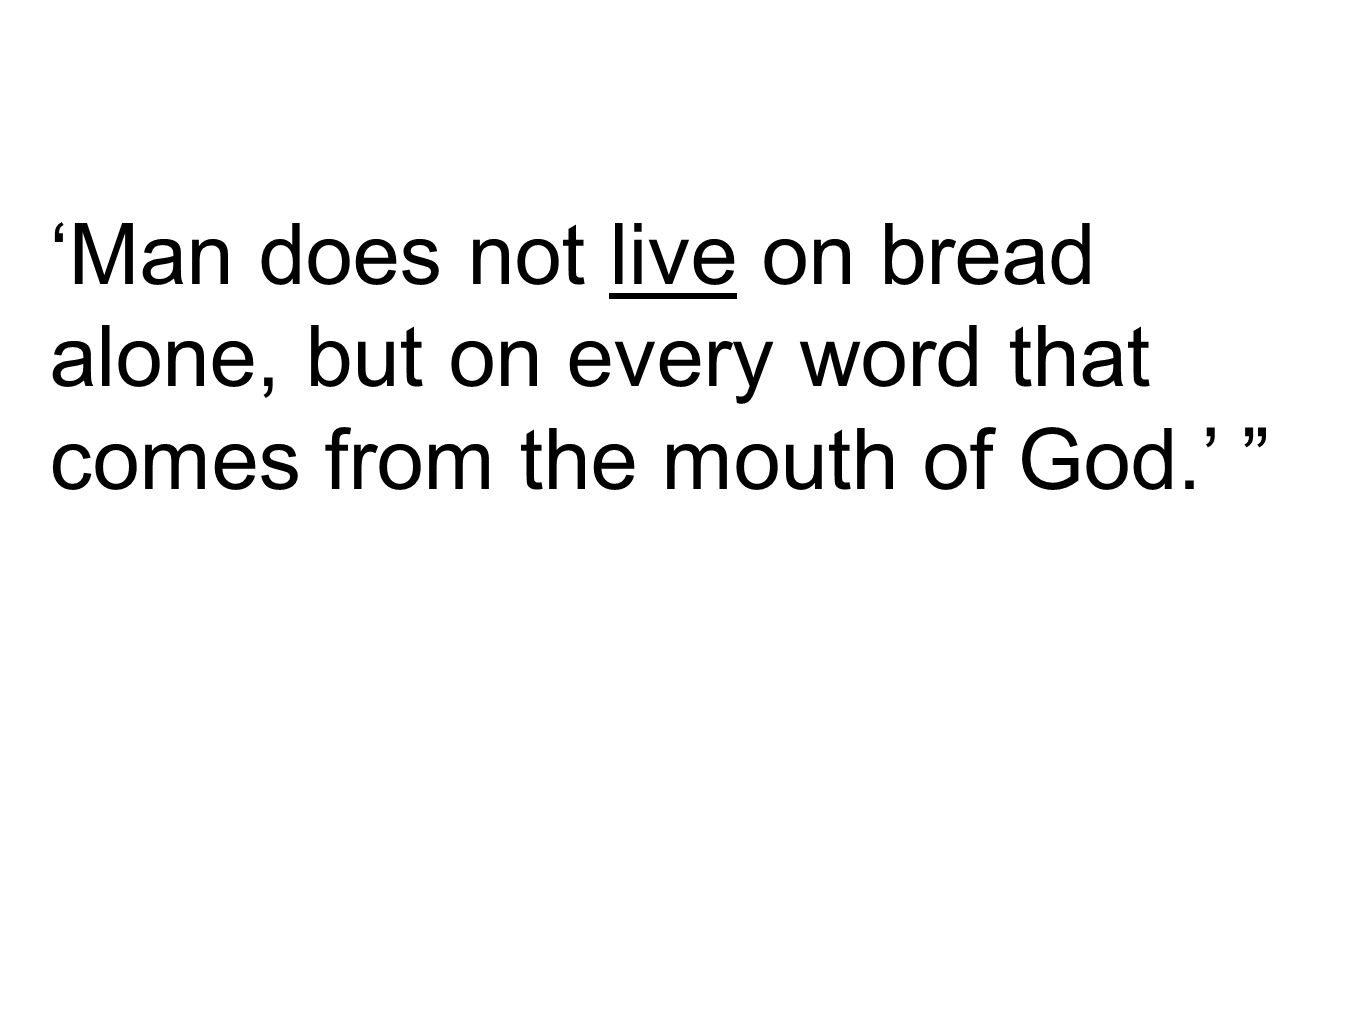 ‘Man does not live on bread alone, but on every word that comes from the mouth of God.’